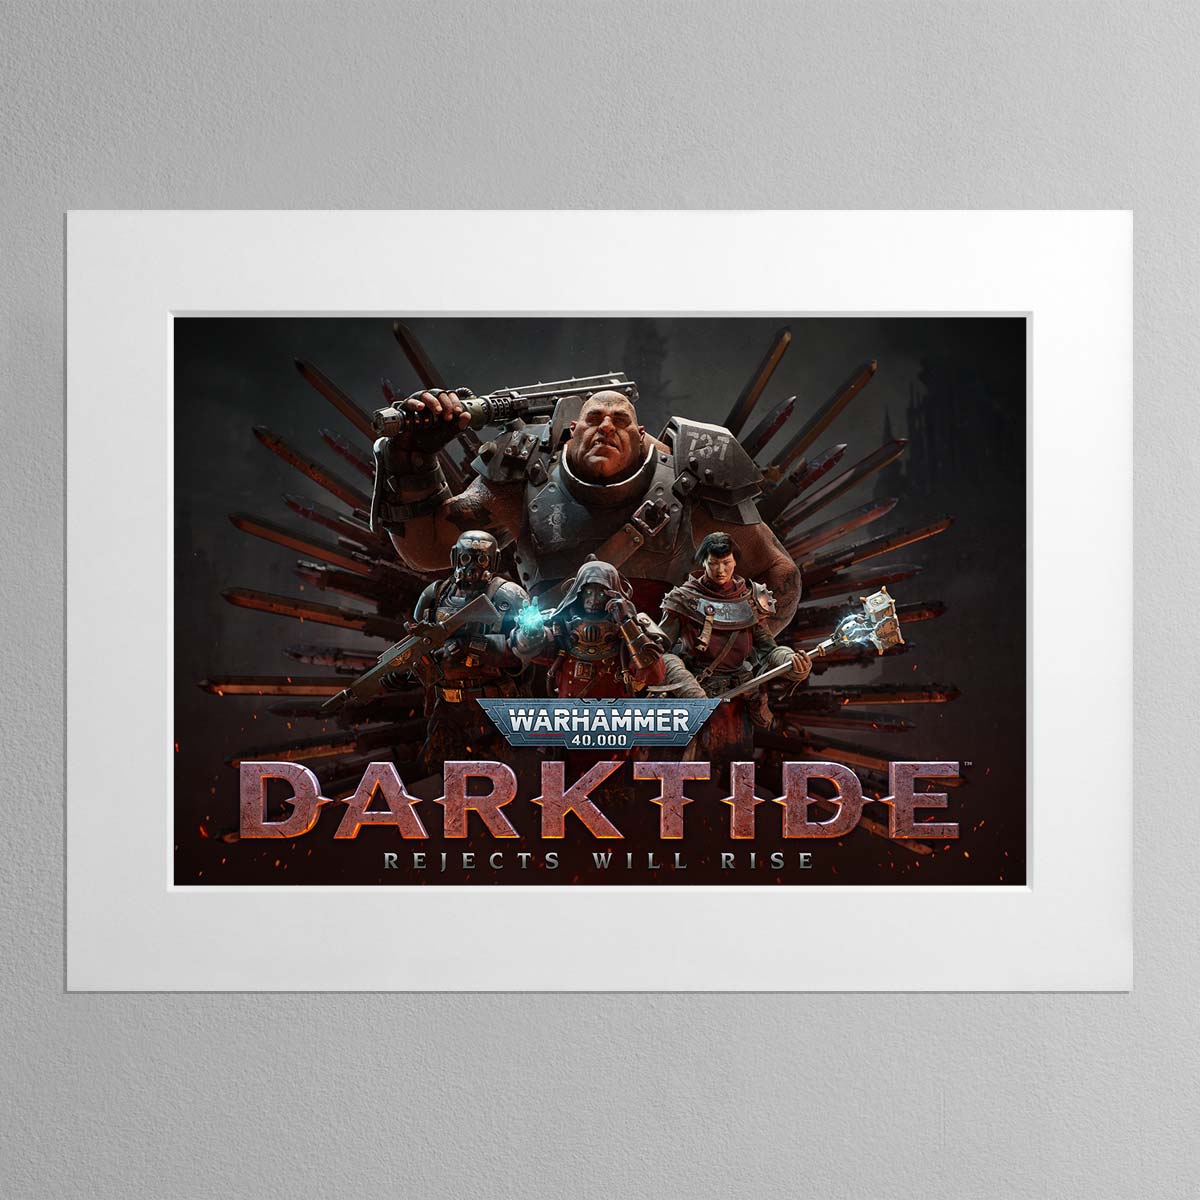 Darktide Rejects Will Rise – Mounted Print